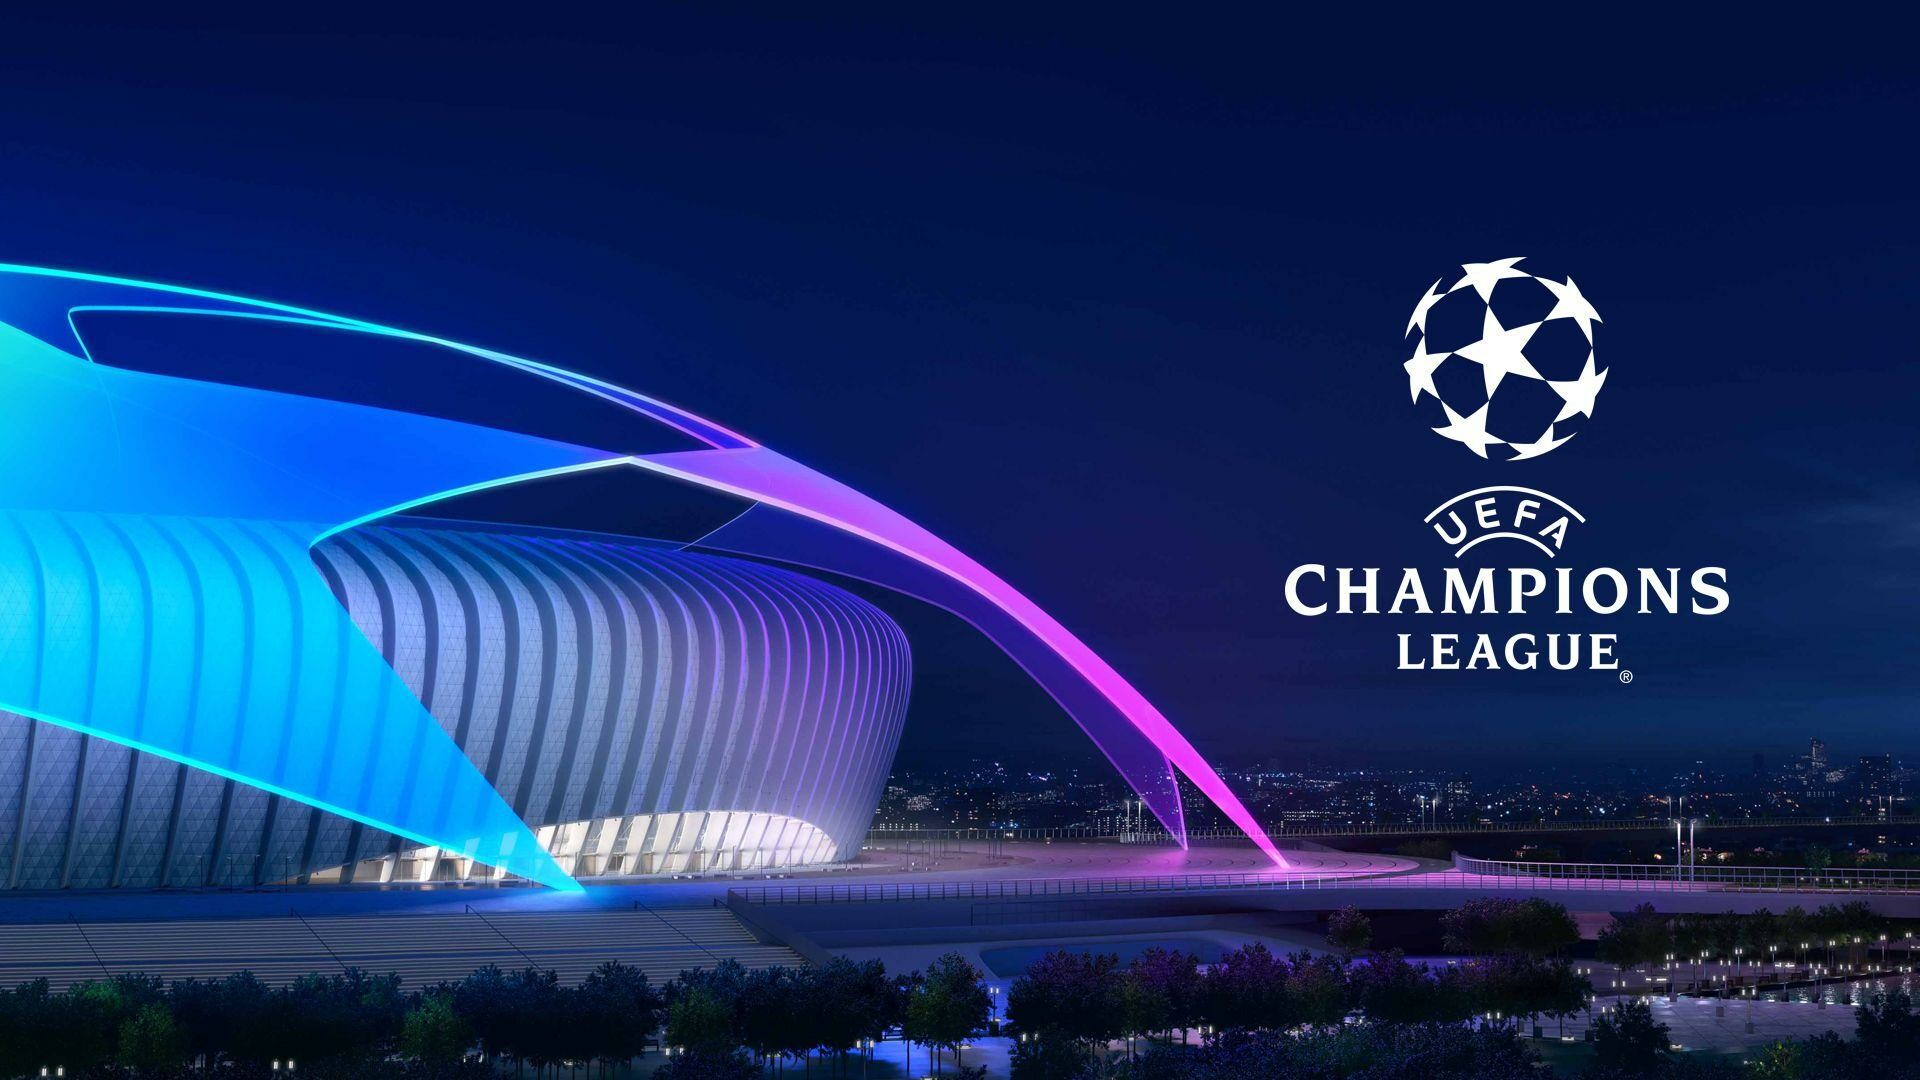 UEFA: European Cup, A quadrennial tournament held between the member countries of the Union of European Football Associations. 1920x1080 Full HD Background.